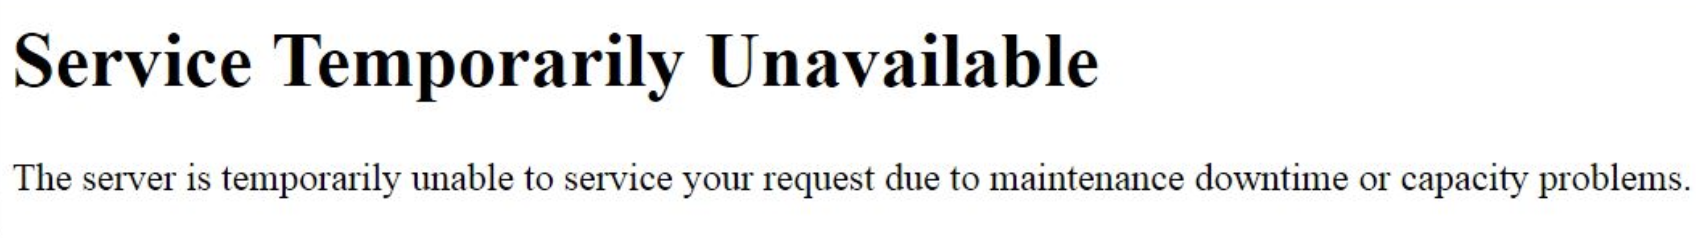 Что значит unavailable. He Page you are looking for is temporarily unavailable. Please try again later.. The Page you are looking for is temporarily unavailable. Please try again later. ВК. Catalog temporarily unavailable. Please try again later.. 502 Service temporarily Overloaded определение.